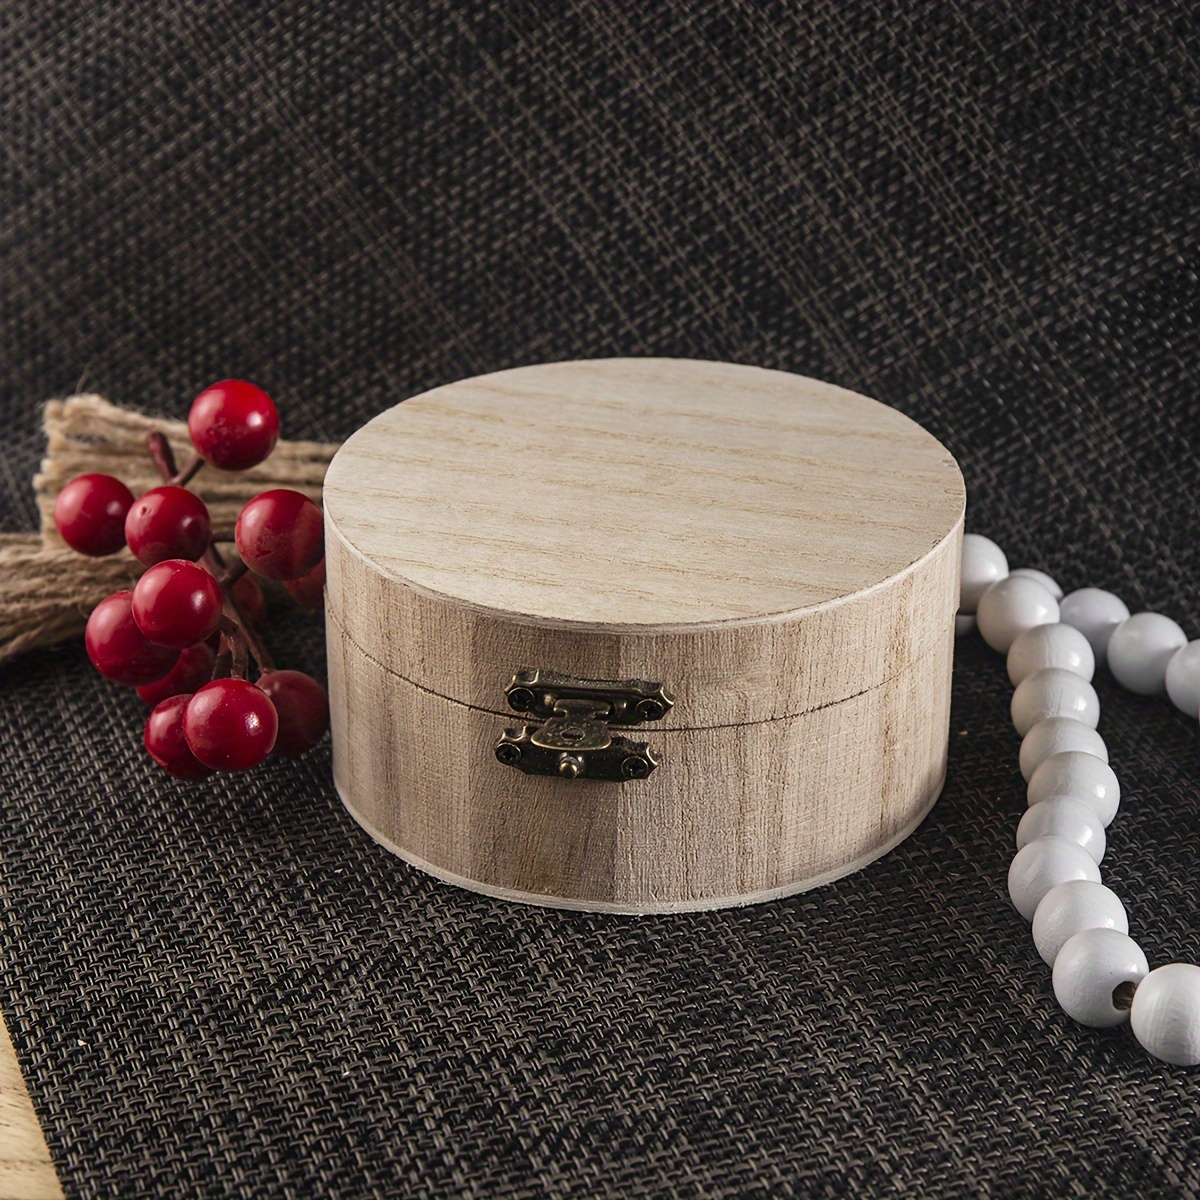 Round Shape Small Ornament Storage Box Wooden Handcrafted Sindoor Box  i71-1002